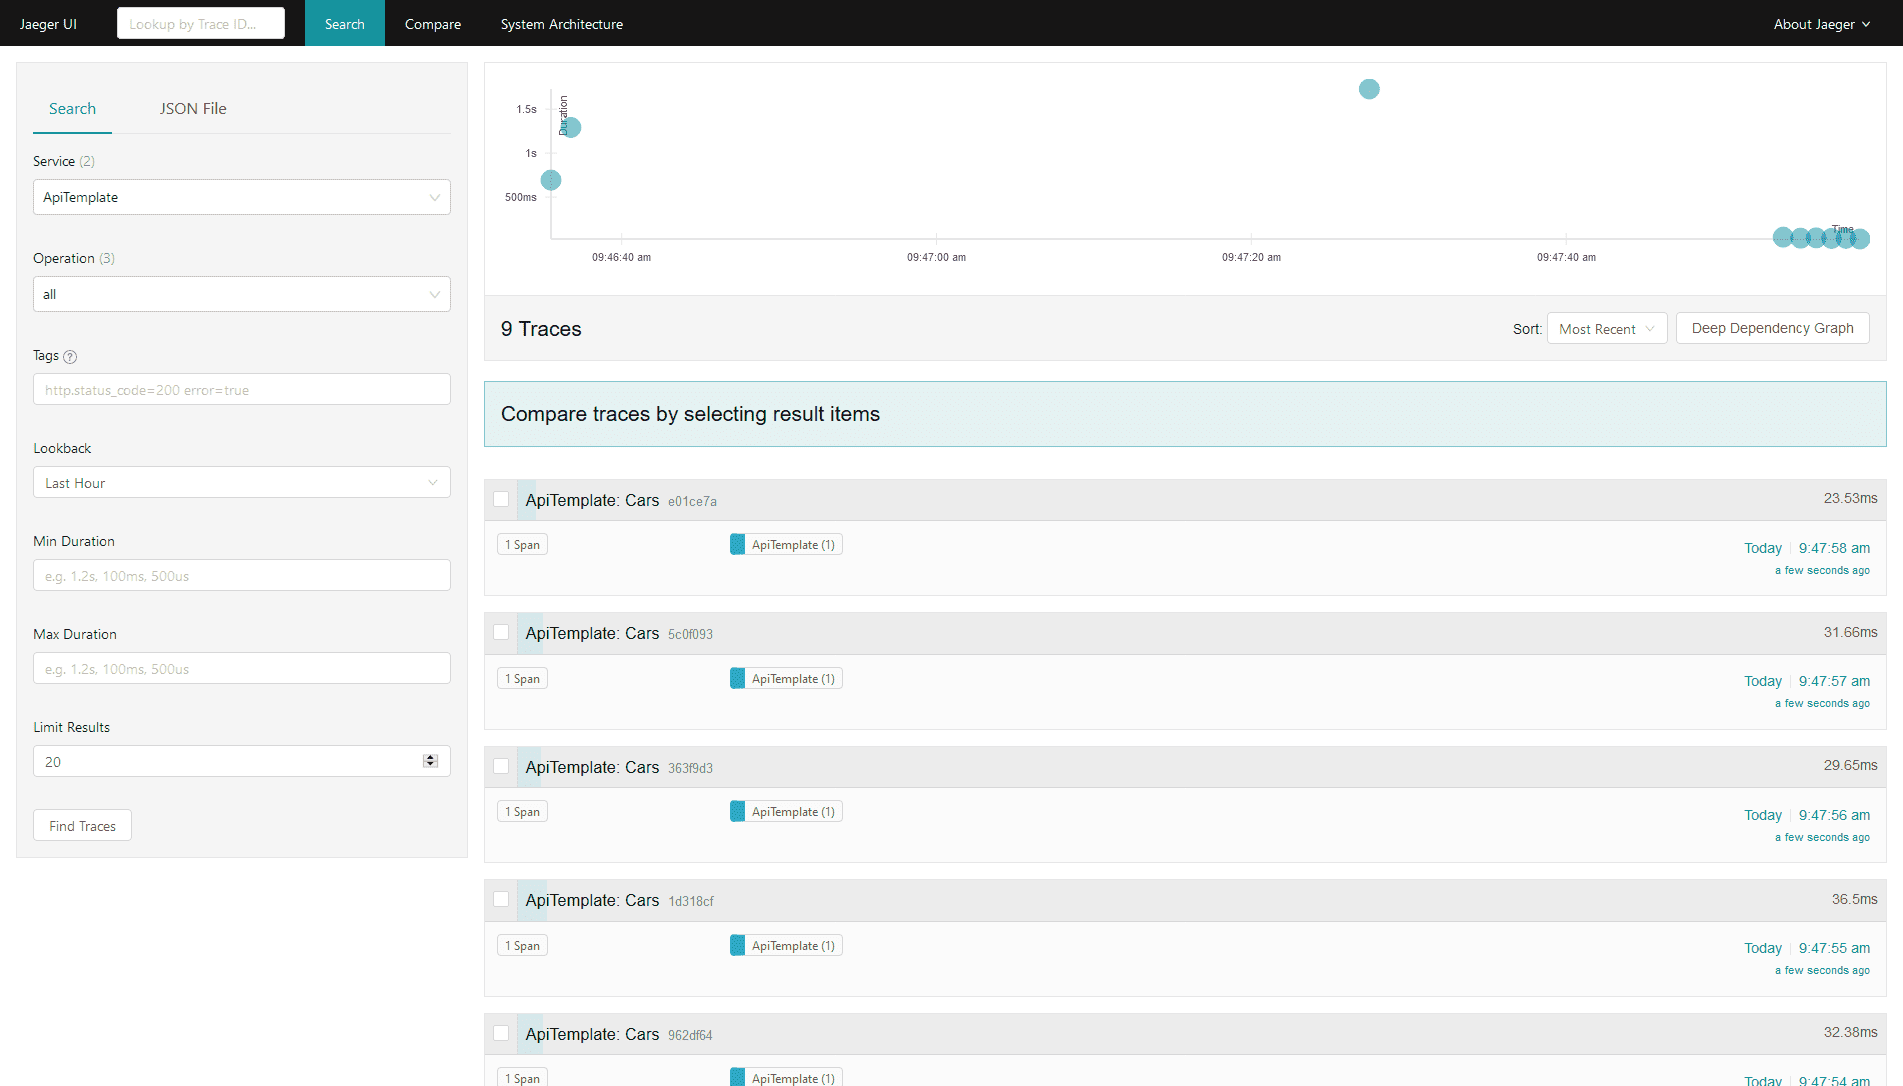 The Jaeger dashboard showing request/response cycles